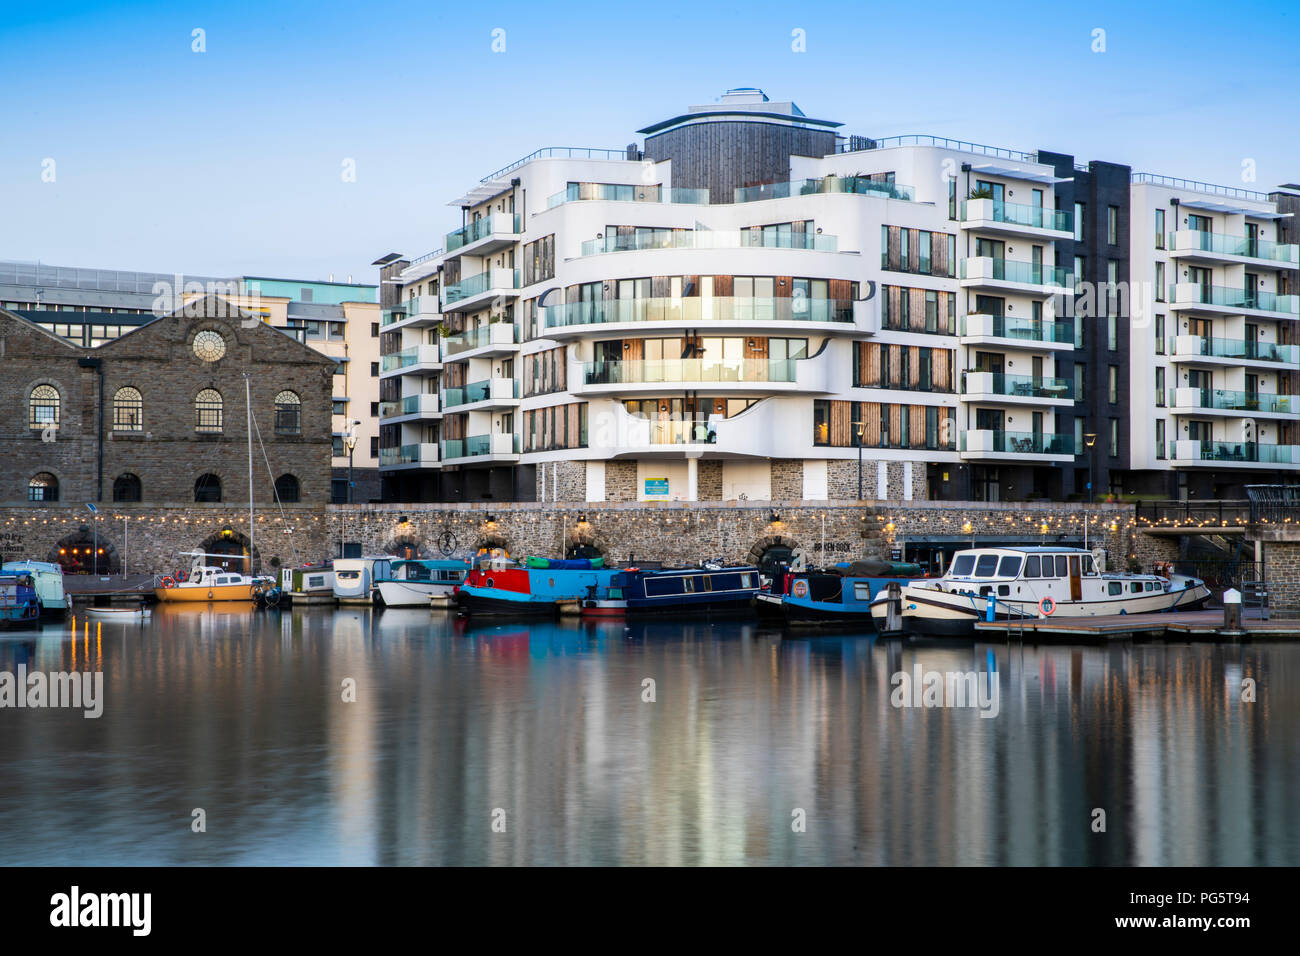 Homes and flats in the Bristol harbourside area in the evening Stock Photo  - Alamy